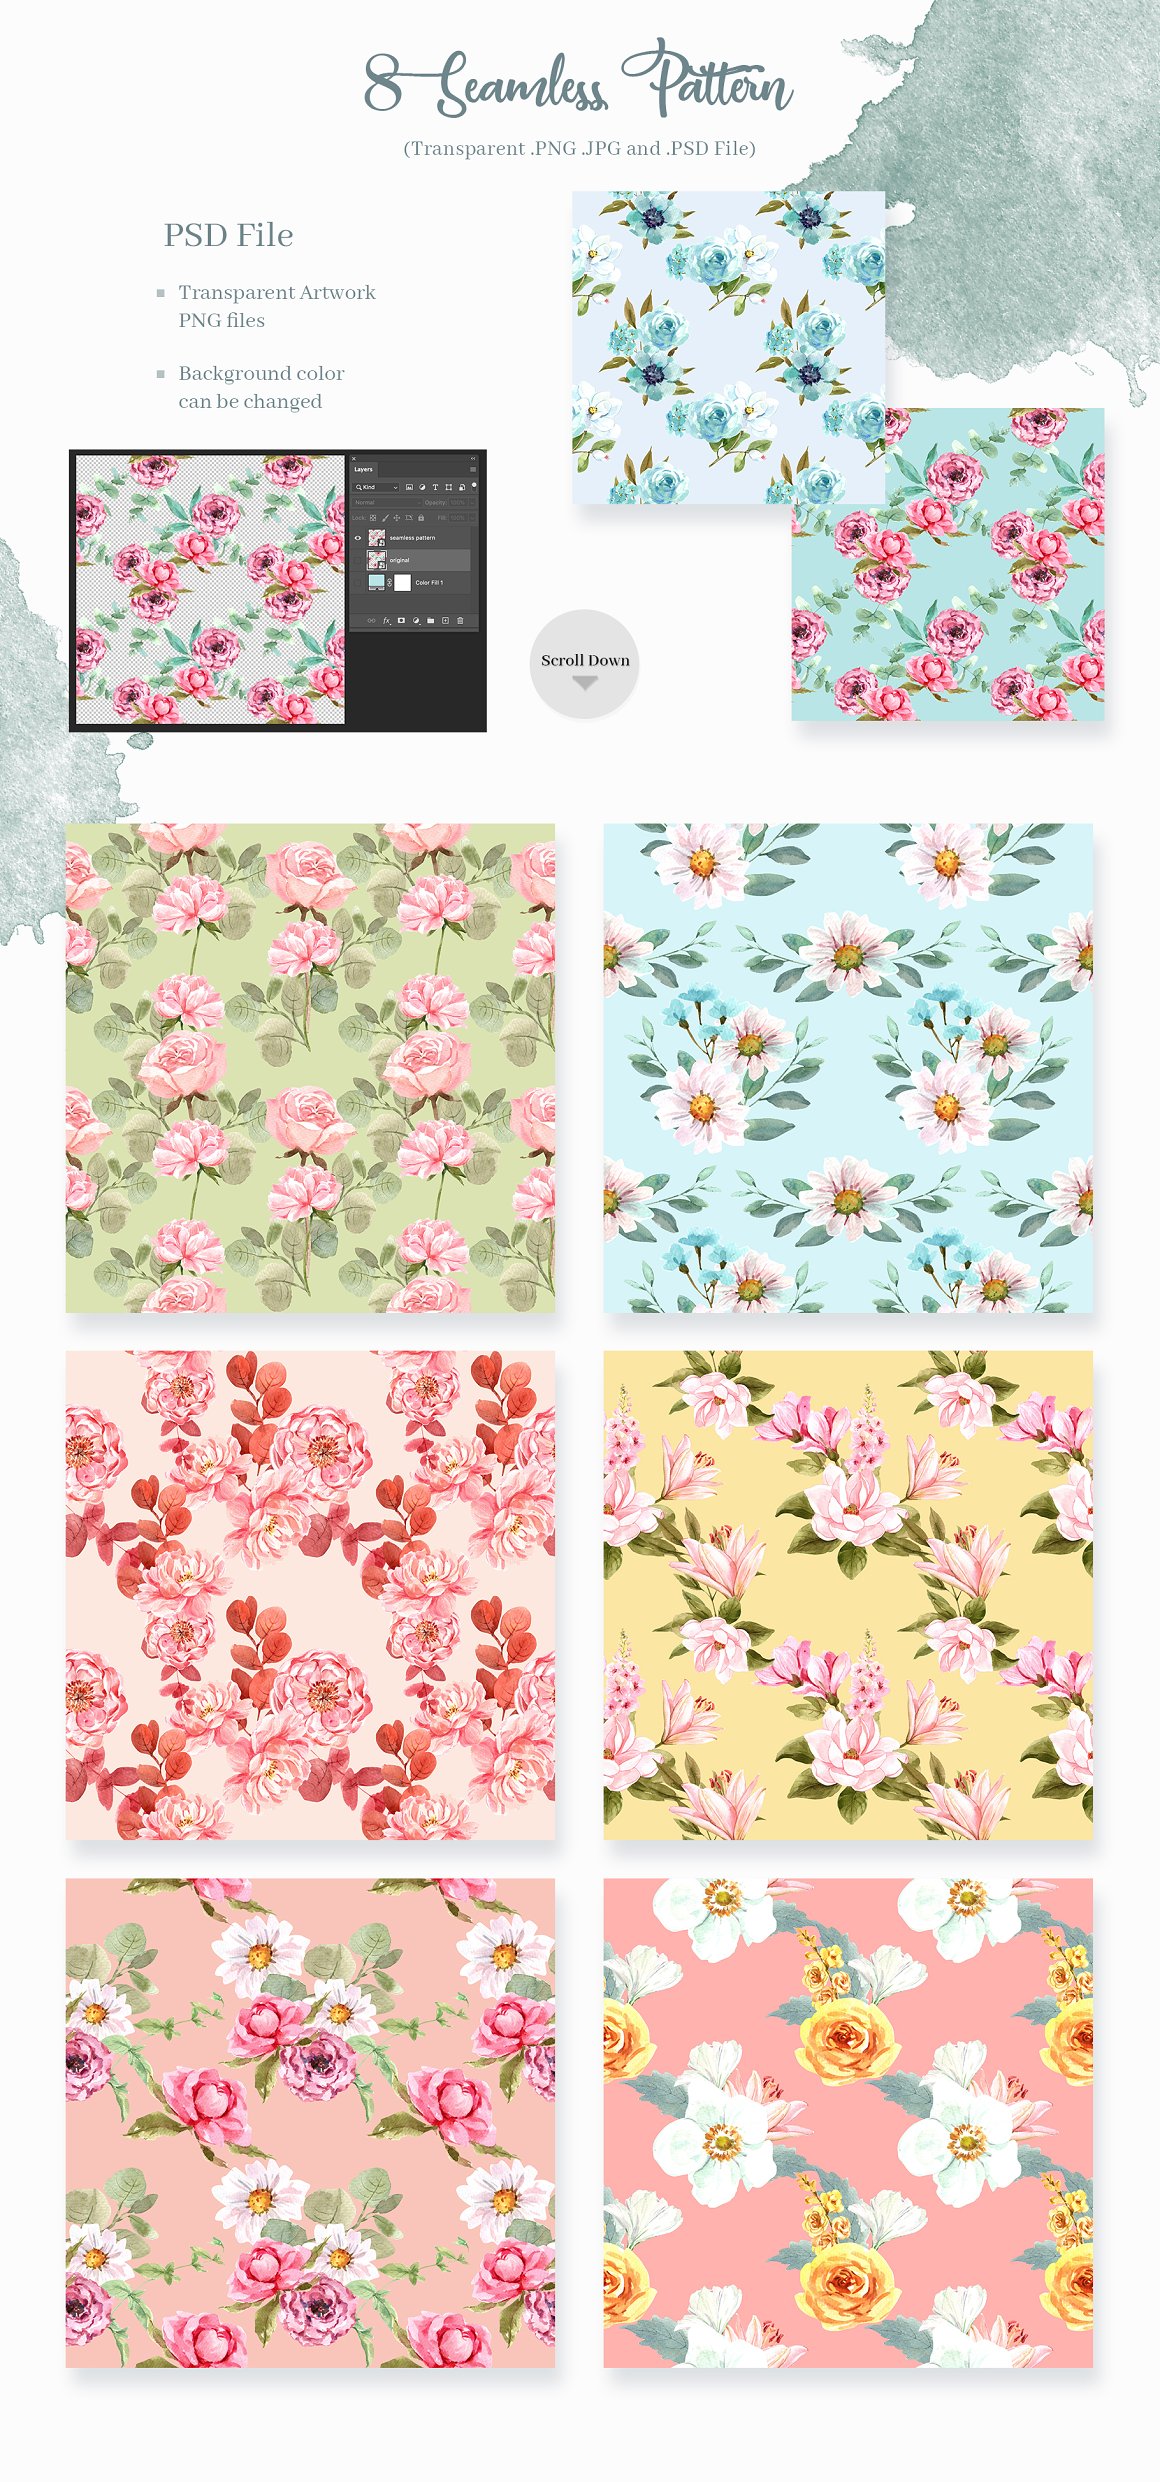 Background pictures with flowers share gift wrap and more.